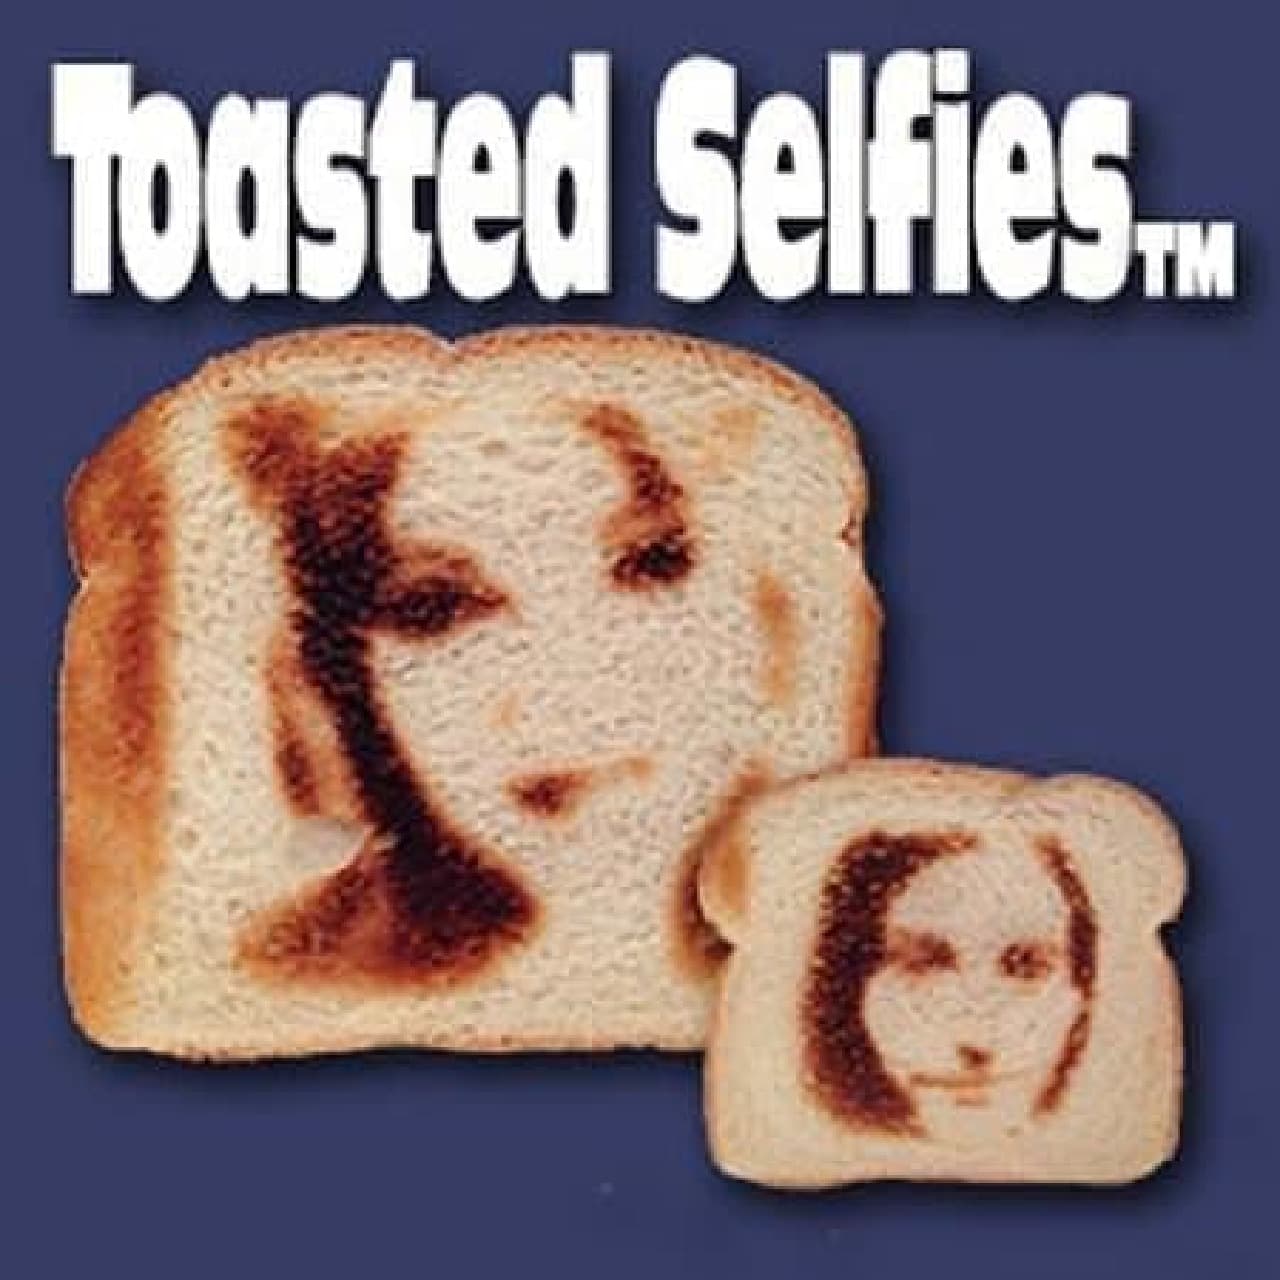 Do you want to "selfie" with toast?